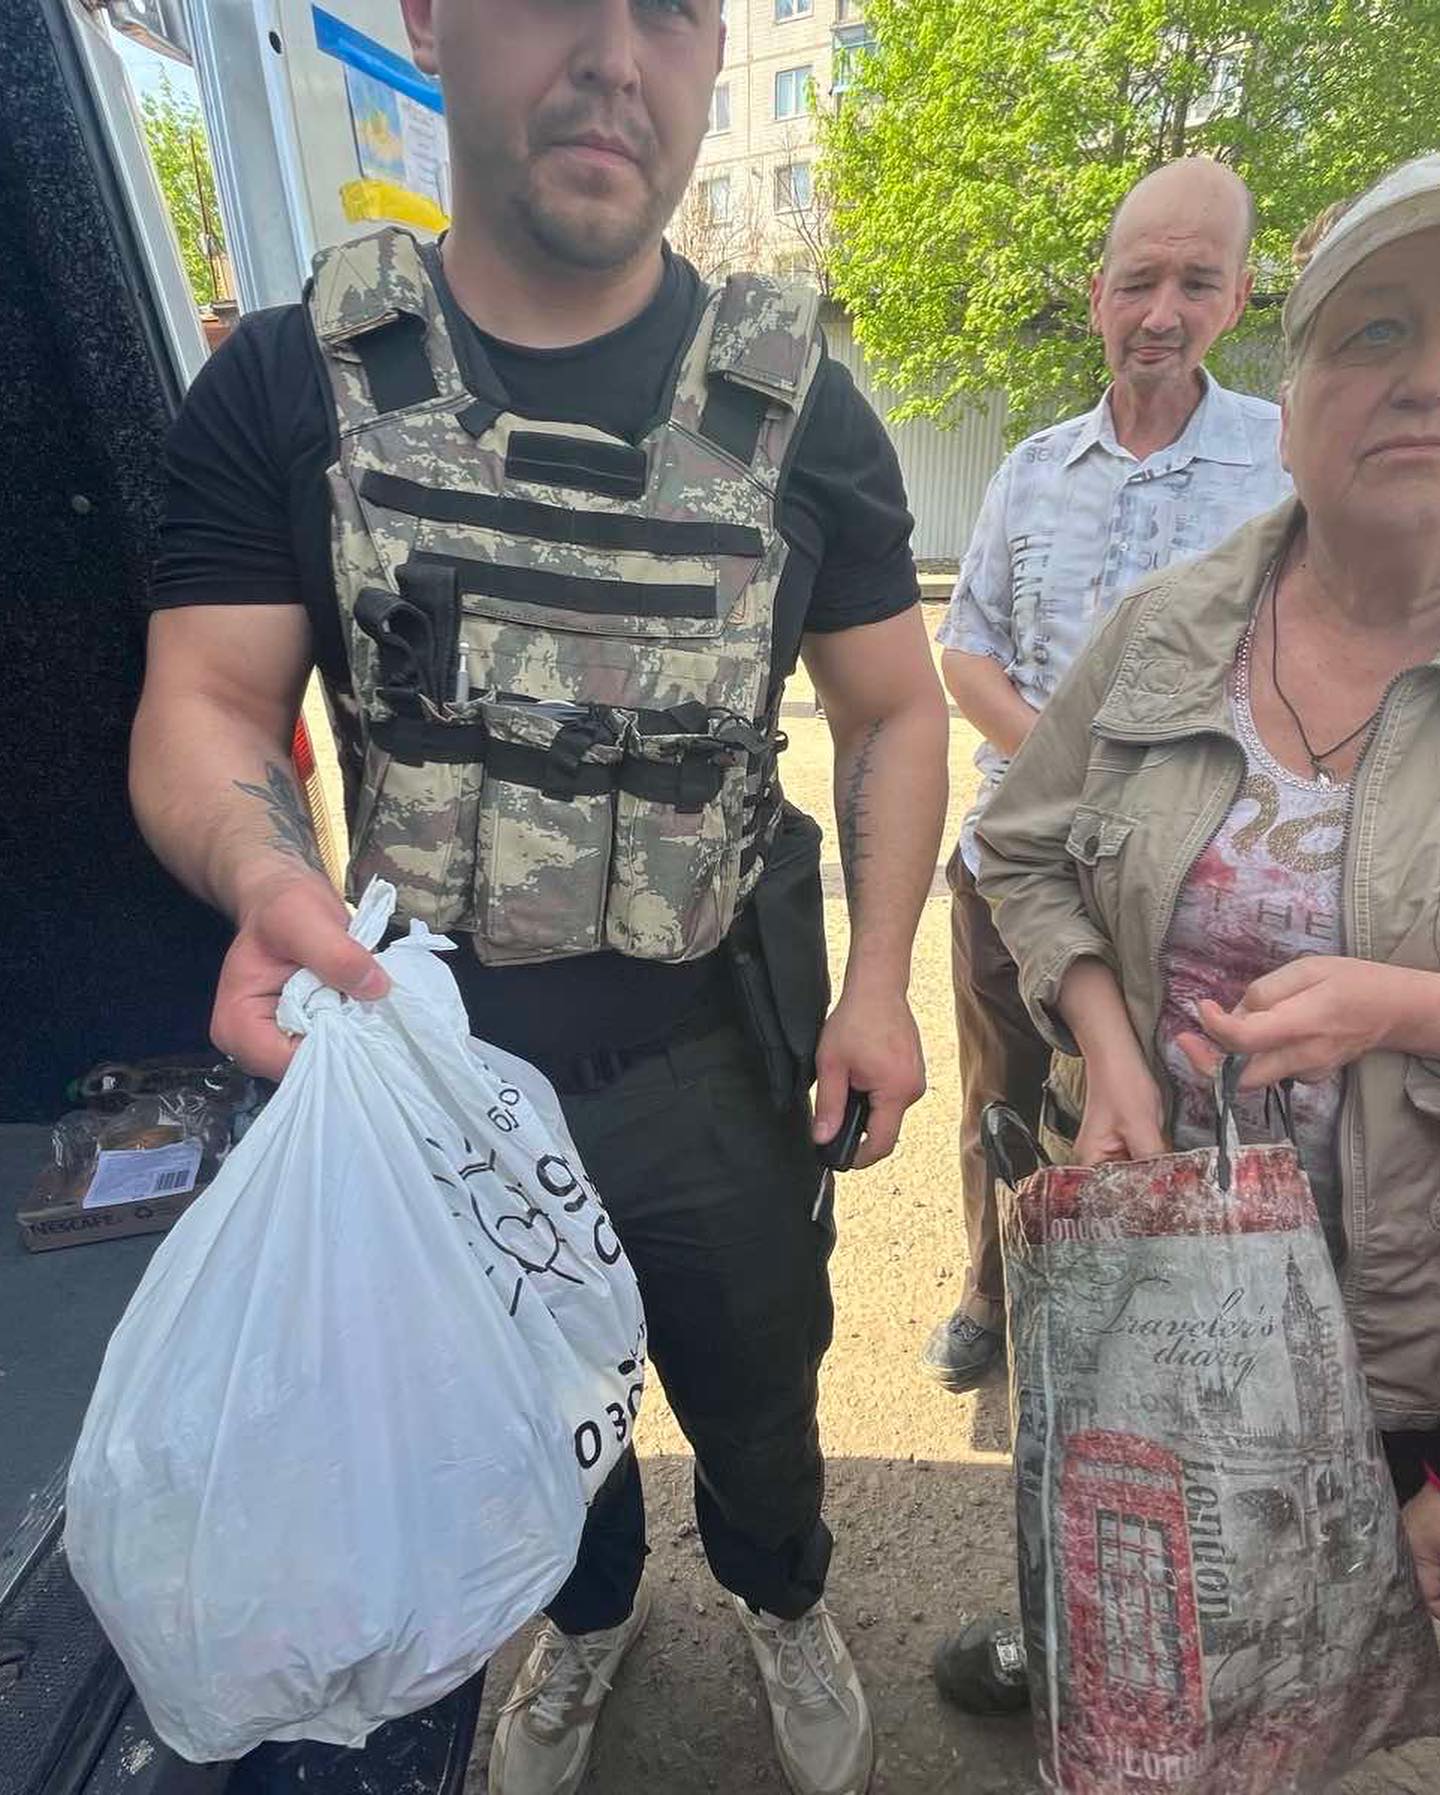 A volunteer in a tactical vest hands a plastic bag to an elderly woman near a van, with another man observing in the background.